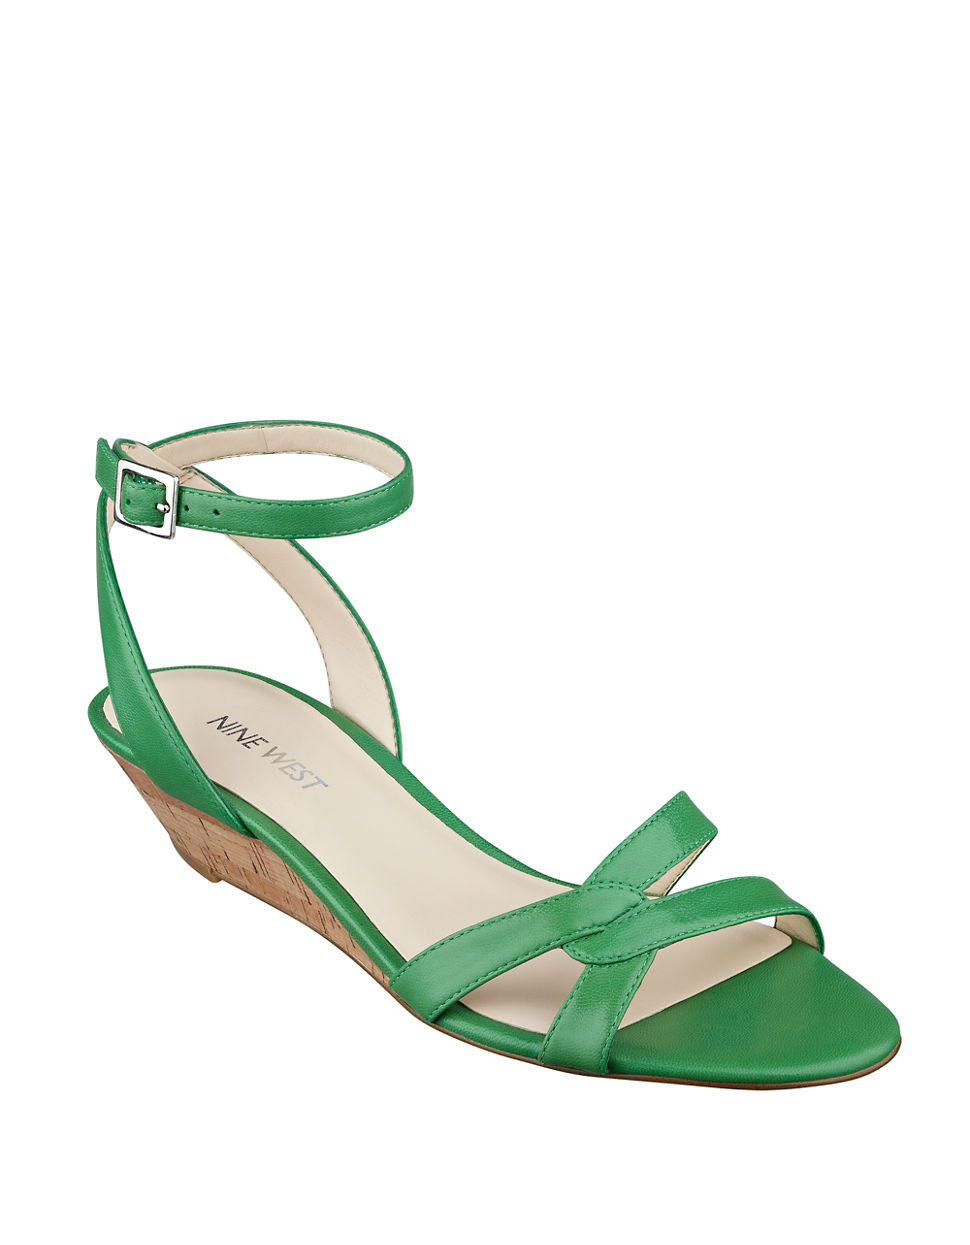 Nine West Valaria Leather Wedge Sandals in Green